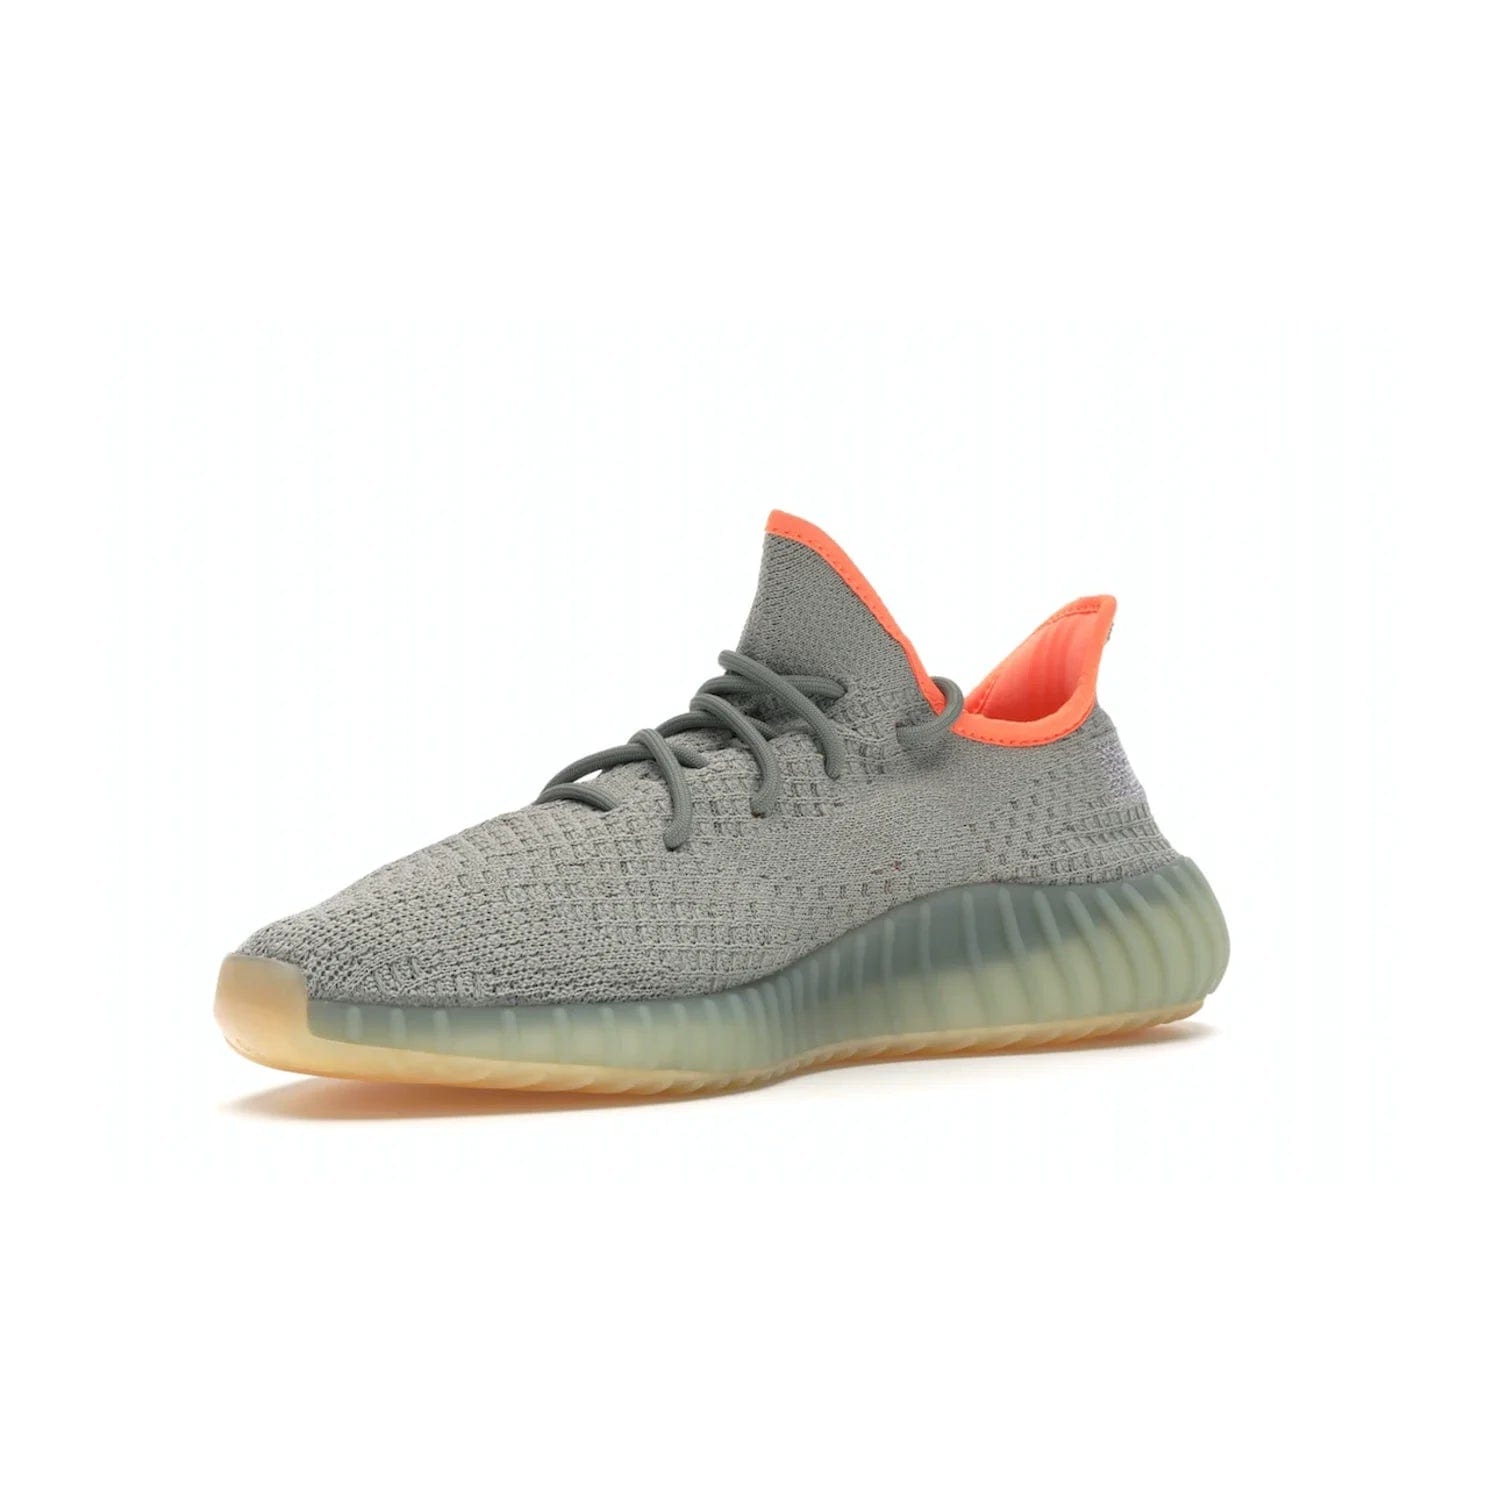 adidas Yeezy Boost 350 V2 Desert Sage - Image 15 - Only at www.BallersClubKickz.com - Upgrade your style with the adidas Yeezy Boost 350 V2 Desert Sage. This 350V2 features a Desert Sage primeknit upper with tonal side stripe, and an orange-highlighted translucent Boost cushioning sole. Stay on-trend in effortless style.